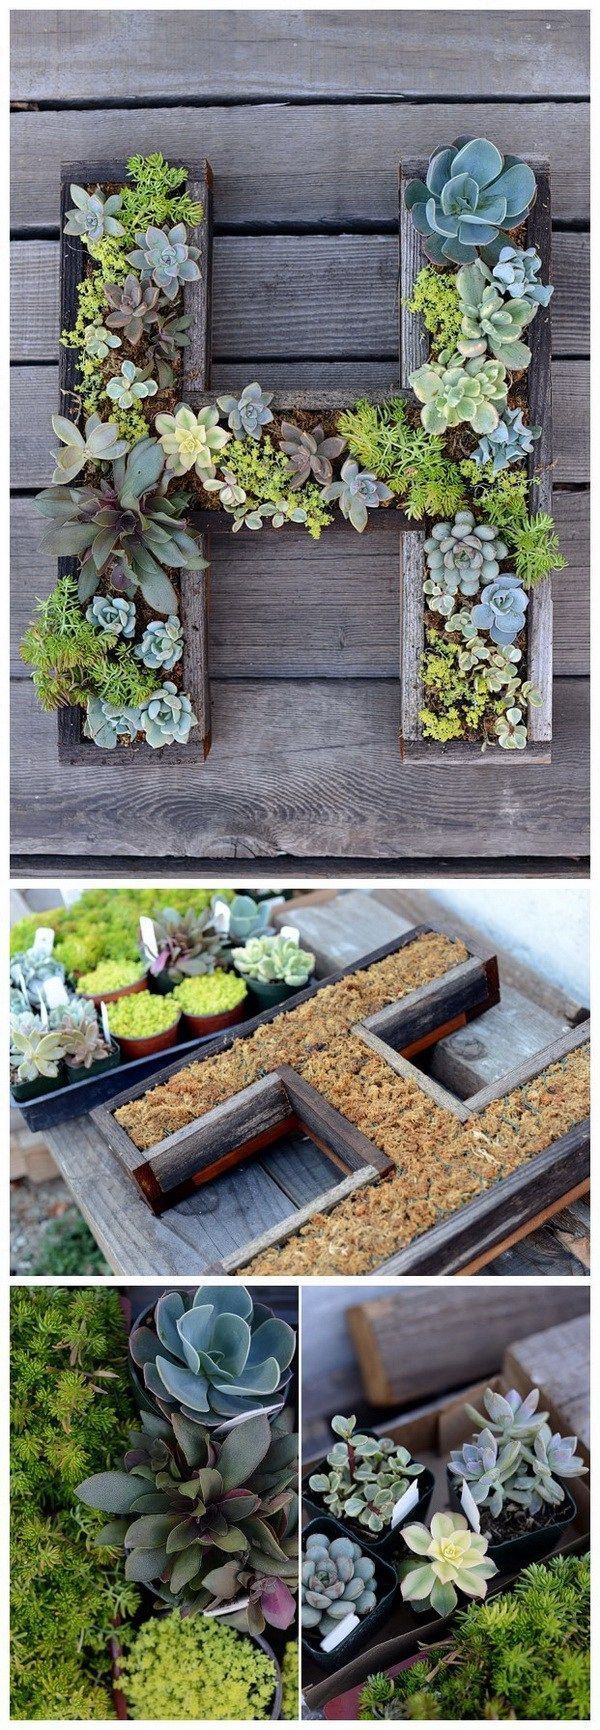 DIY Wall-Mounted Succulent Letter. Make this wall-mounted succulent letter planter and bring in some greenery to your home.